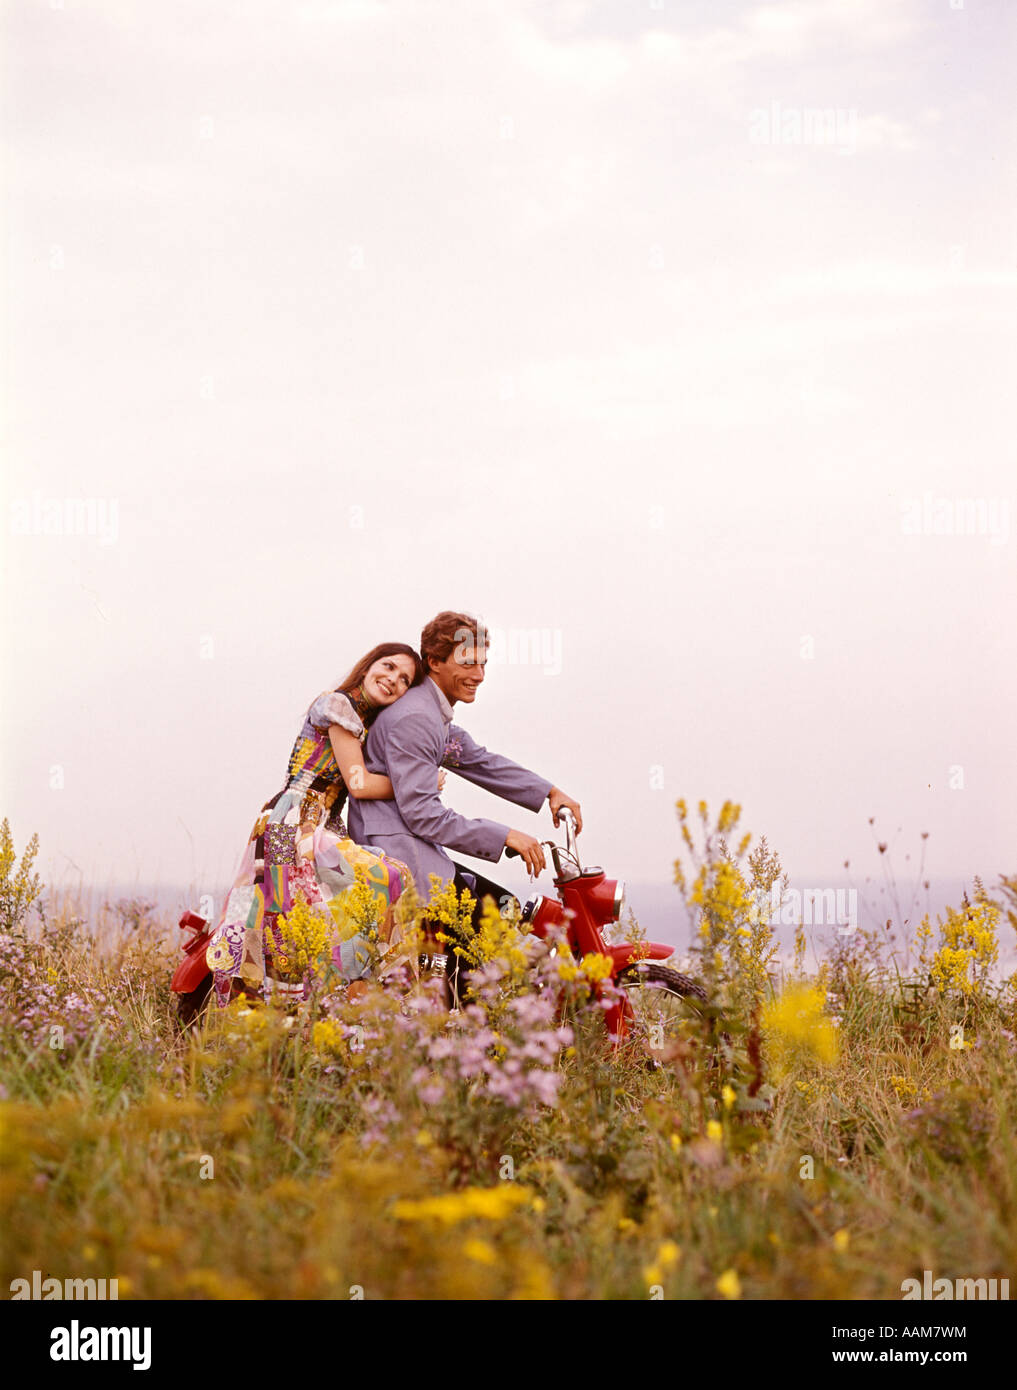 1970 1970s YOUNG COUPLE MAN WOMAN ROMANTIC RIDING RED MOTORCYCLE MOTOR BIKE FIELD FLOWERS Stock Photo